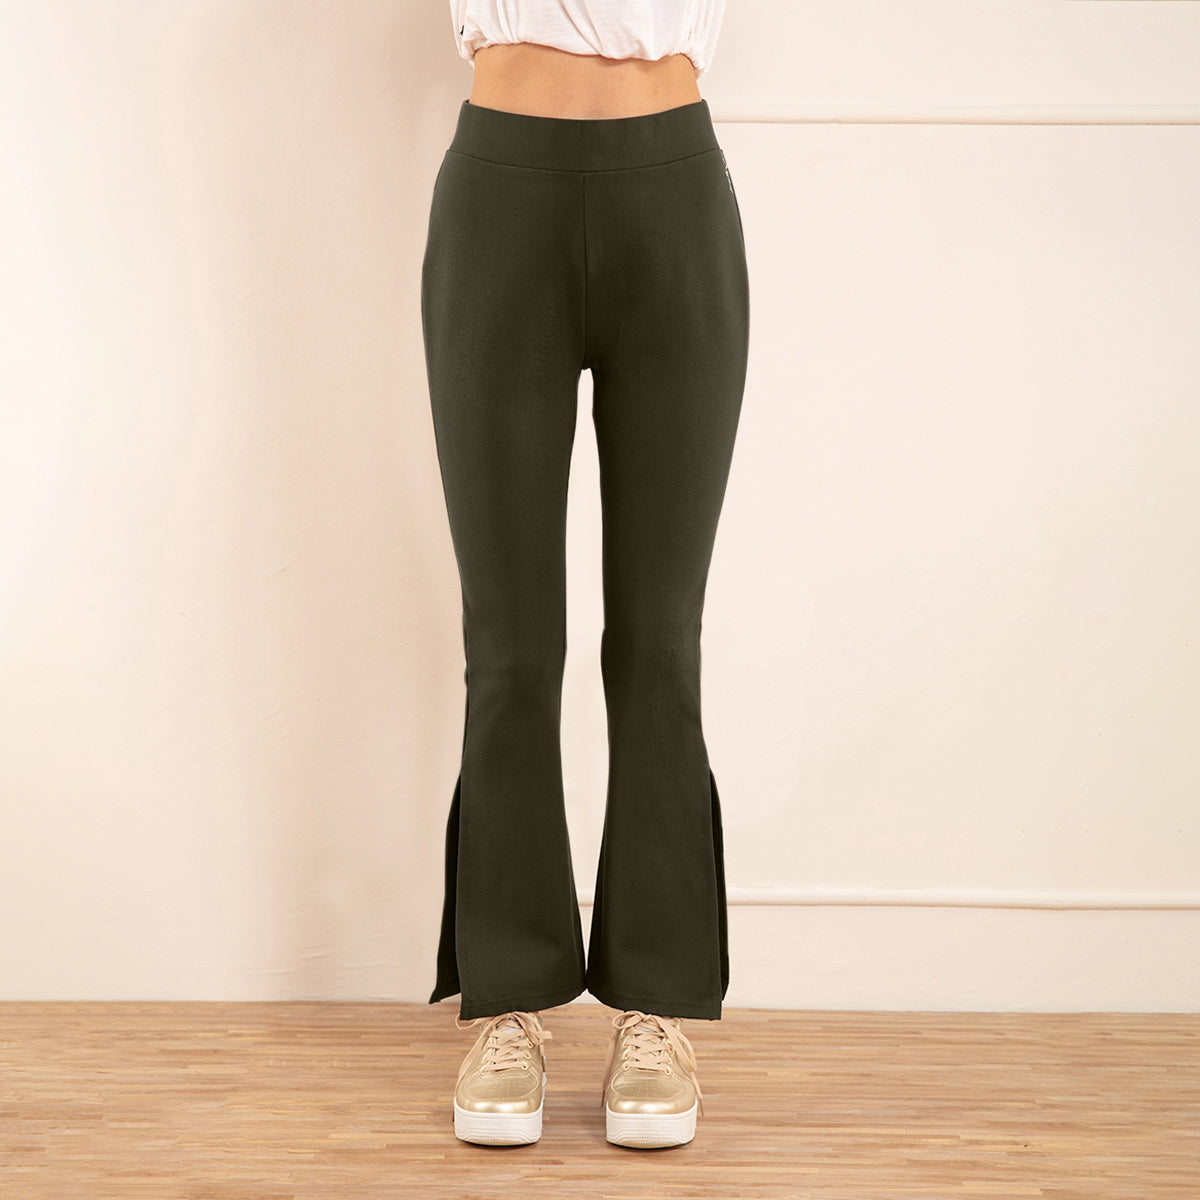 Nykd All Day High Waisted Flared Pants- NYAT234 Beetle Green